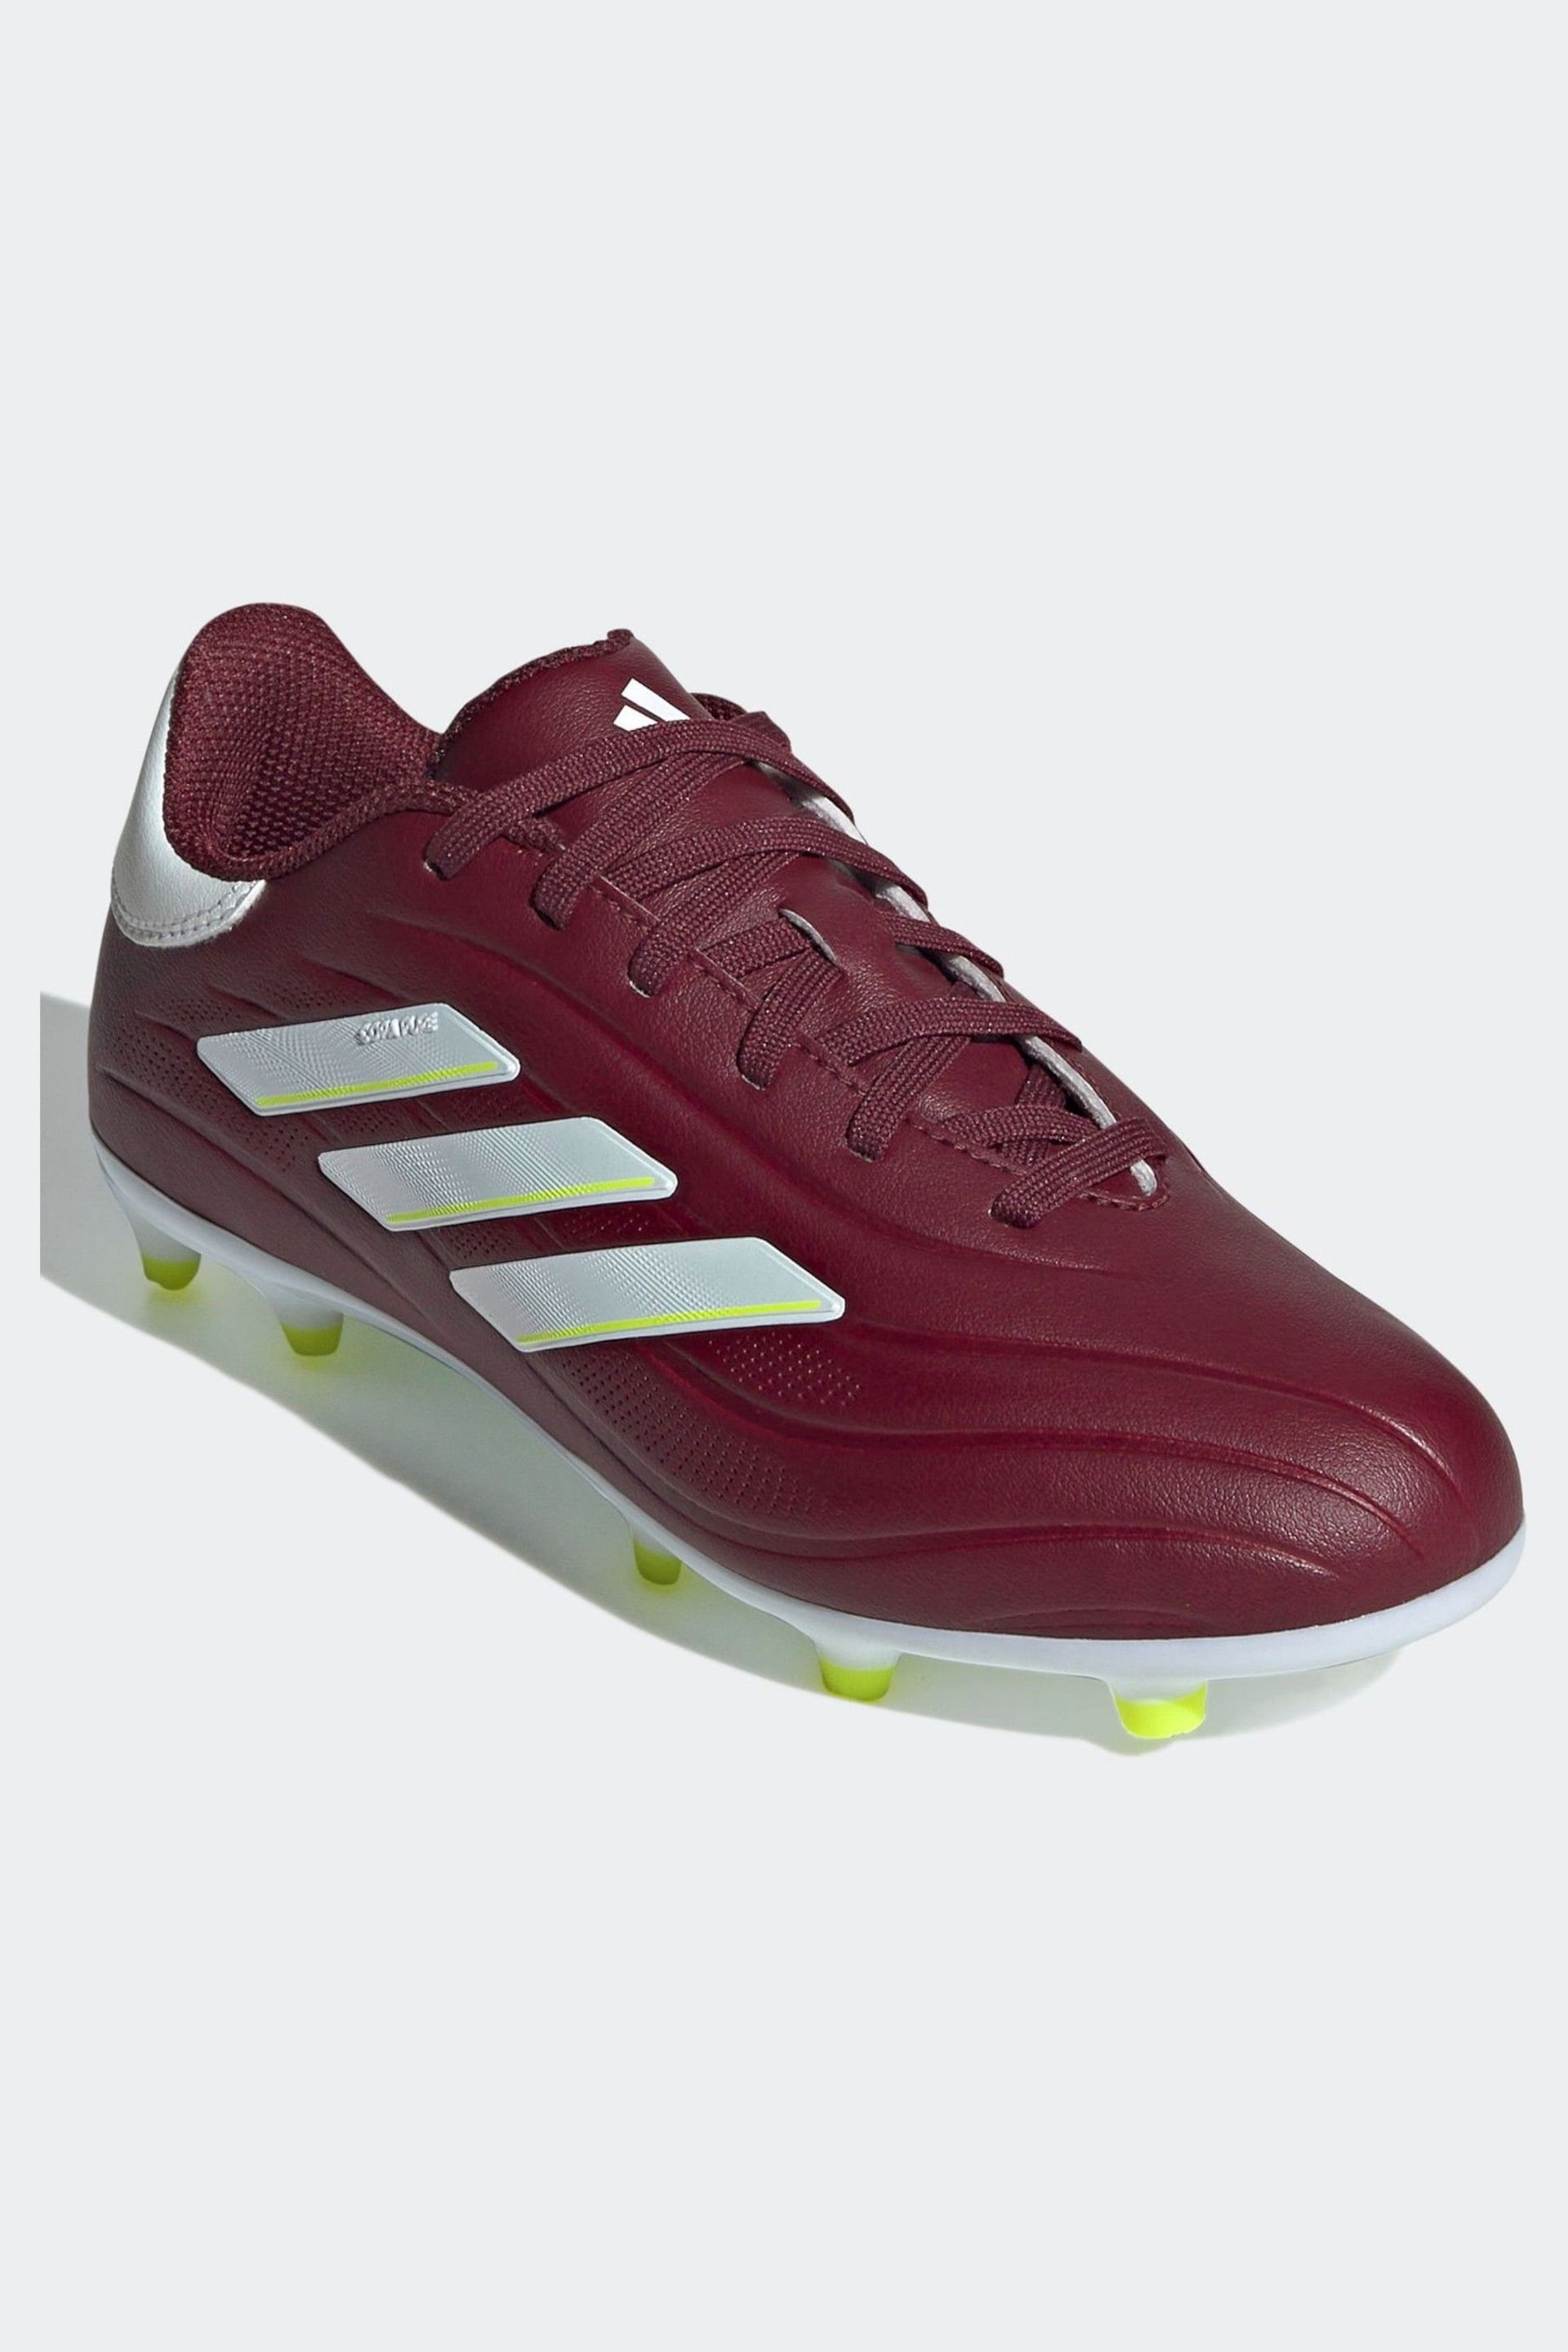 adidas Red/White Football Copa Pure II League Firm Ground Kids Boots - Image 5 of 12